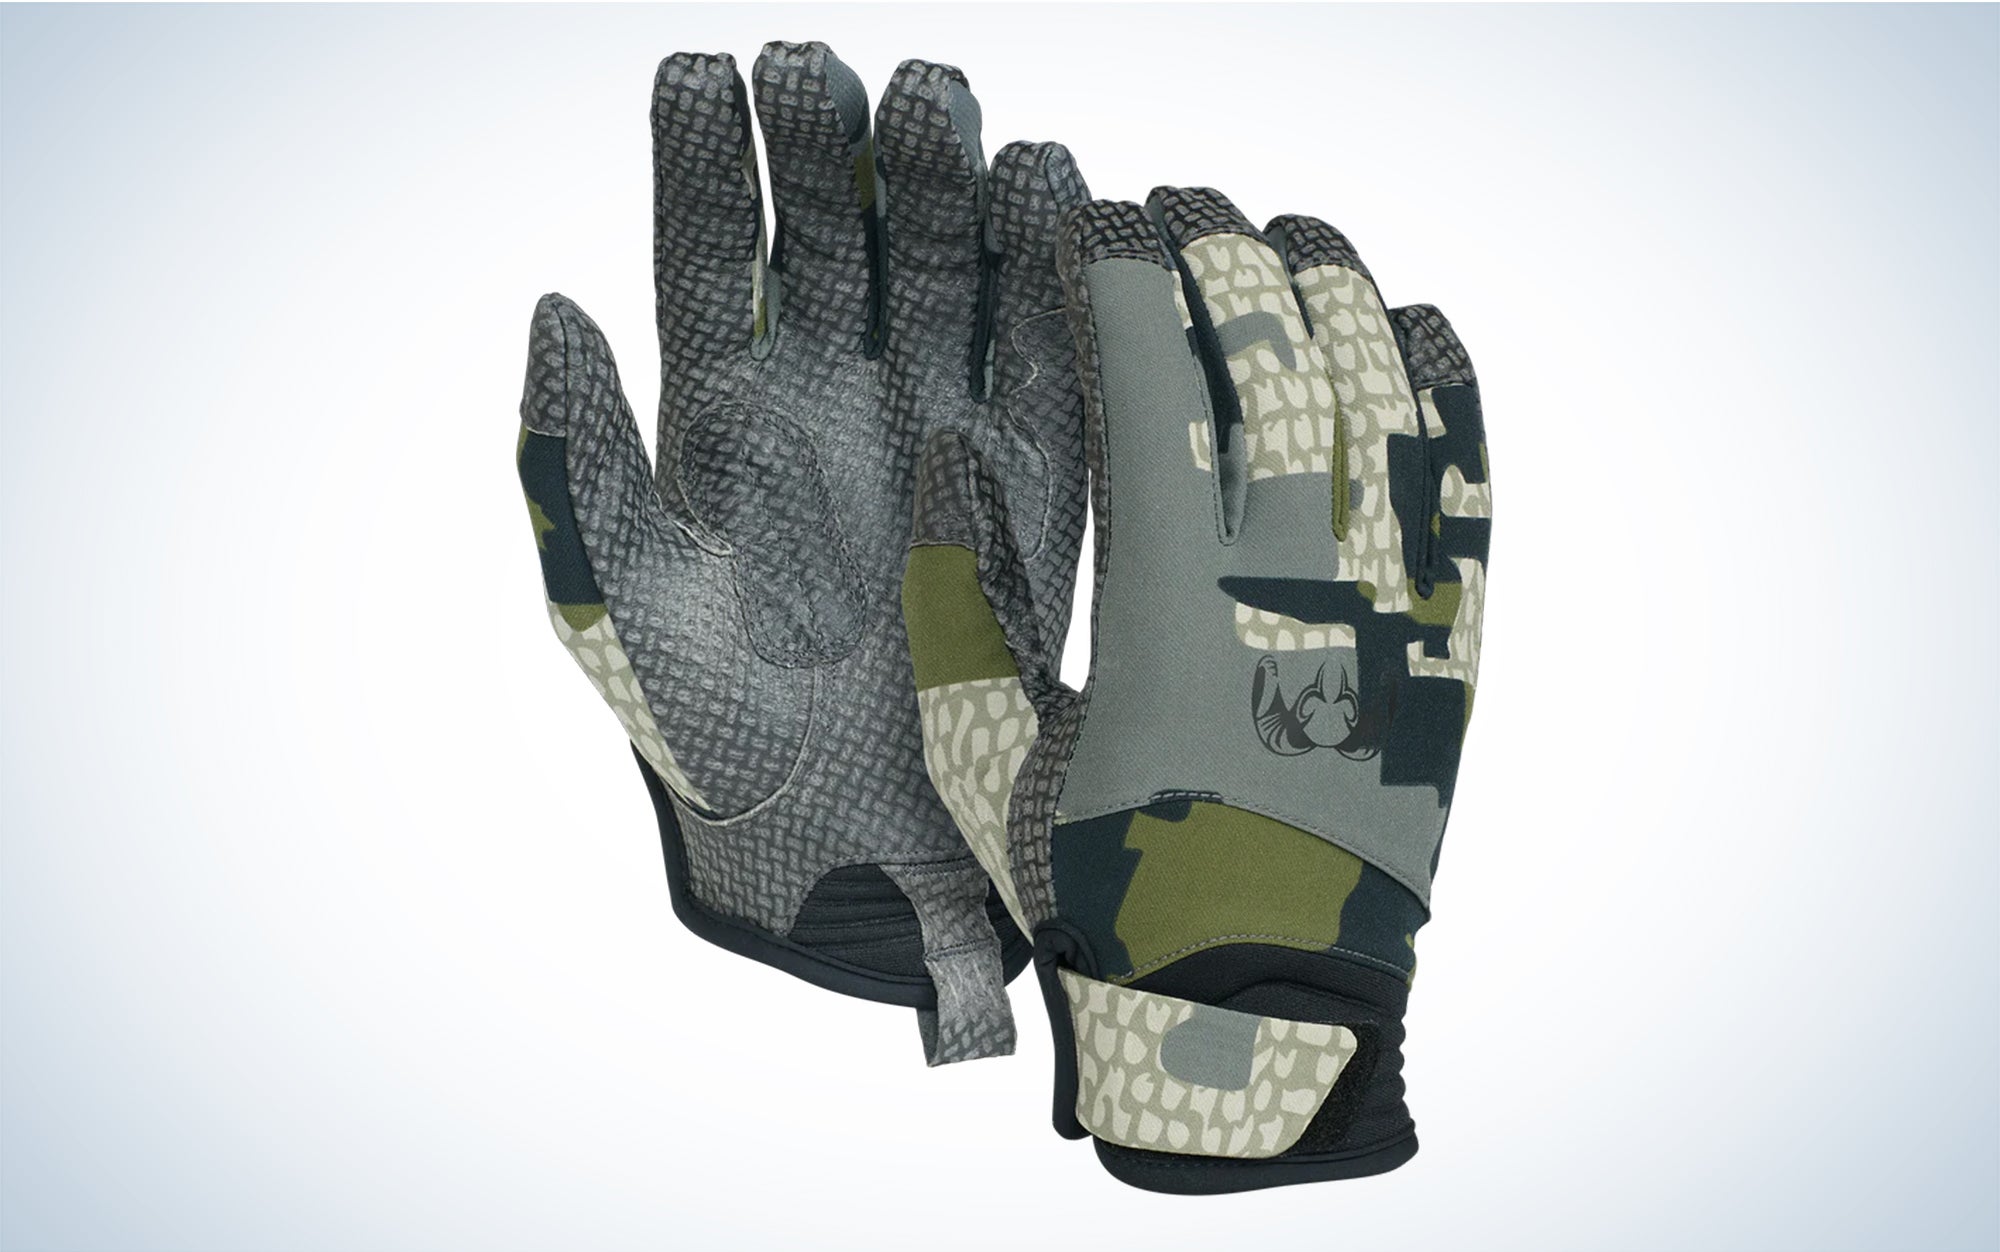 We tested the Kuiu Attack Glove.